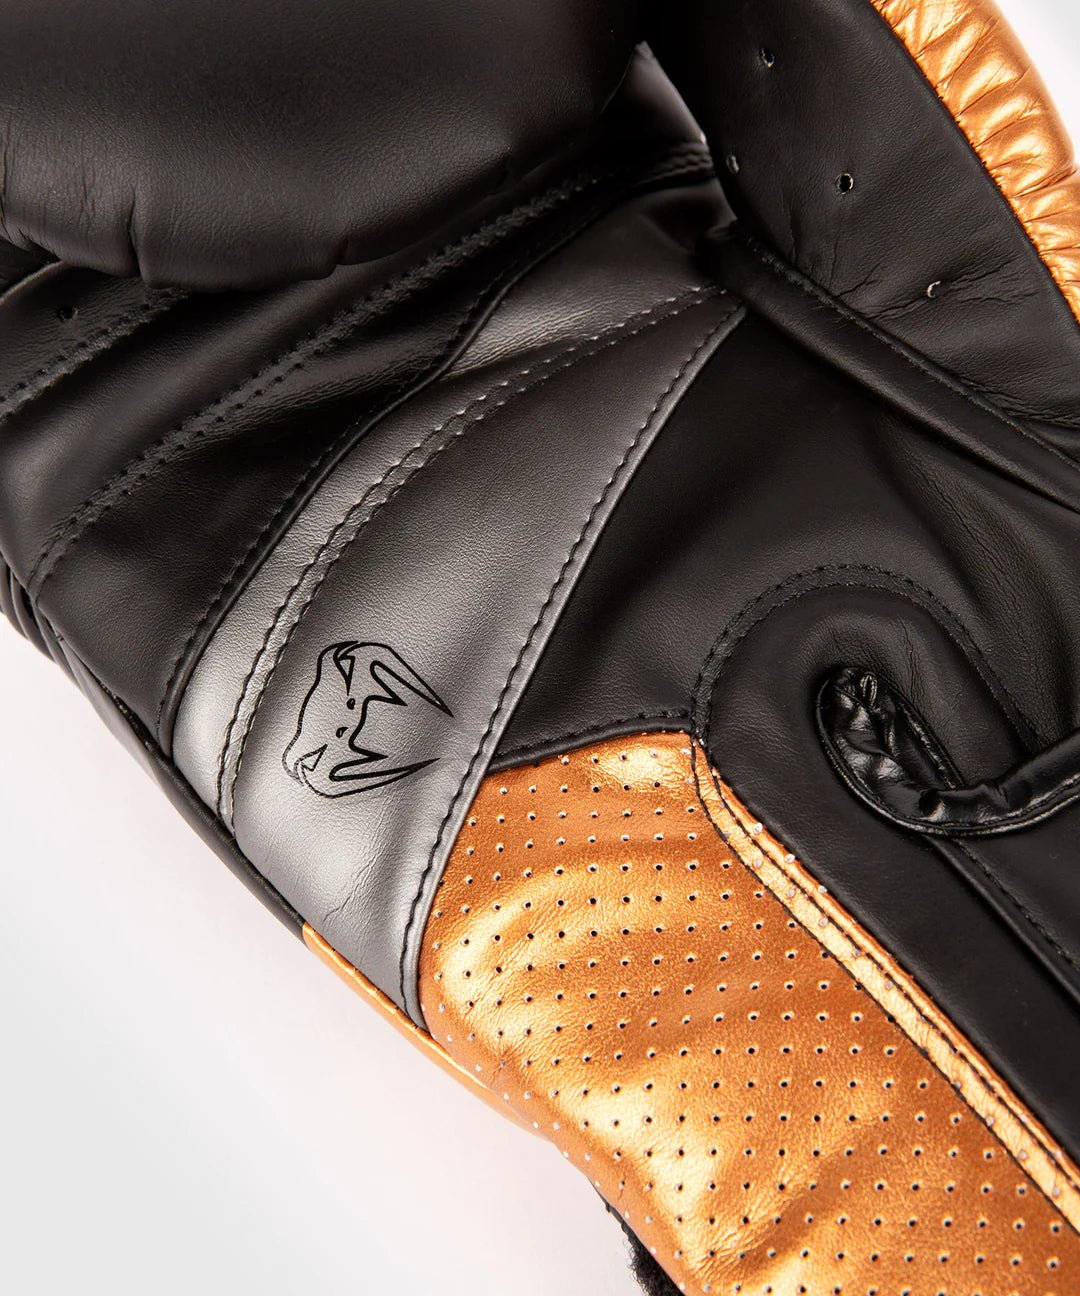 Elite Evo 2.0 Boxing Gloves for combat sports with synthetic leather and shock absorption. Close Up View